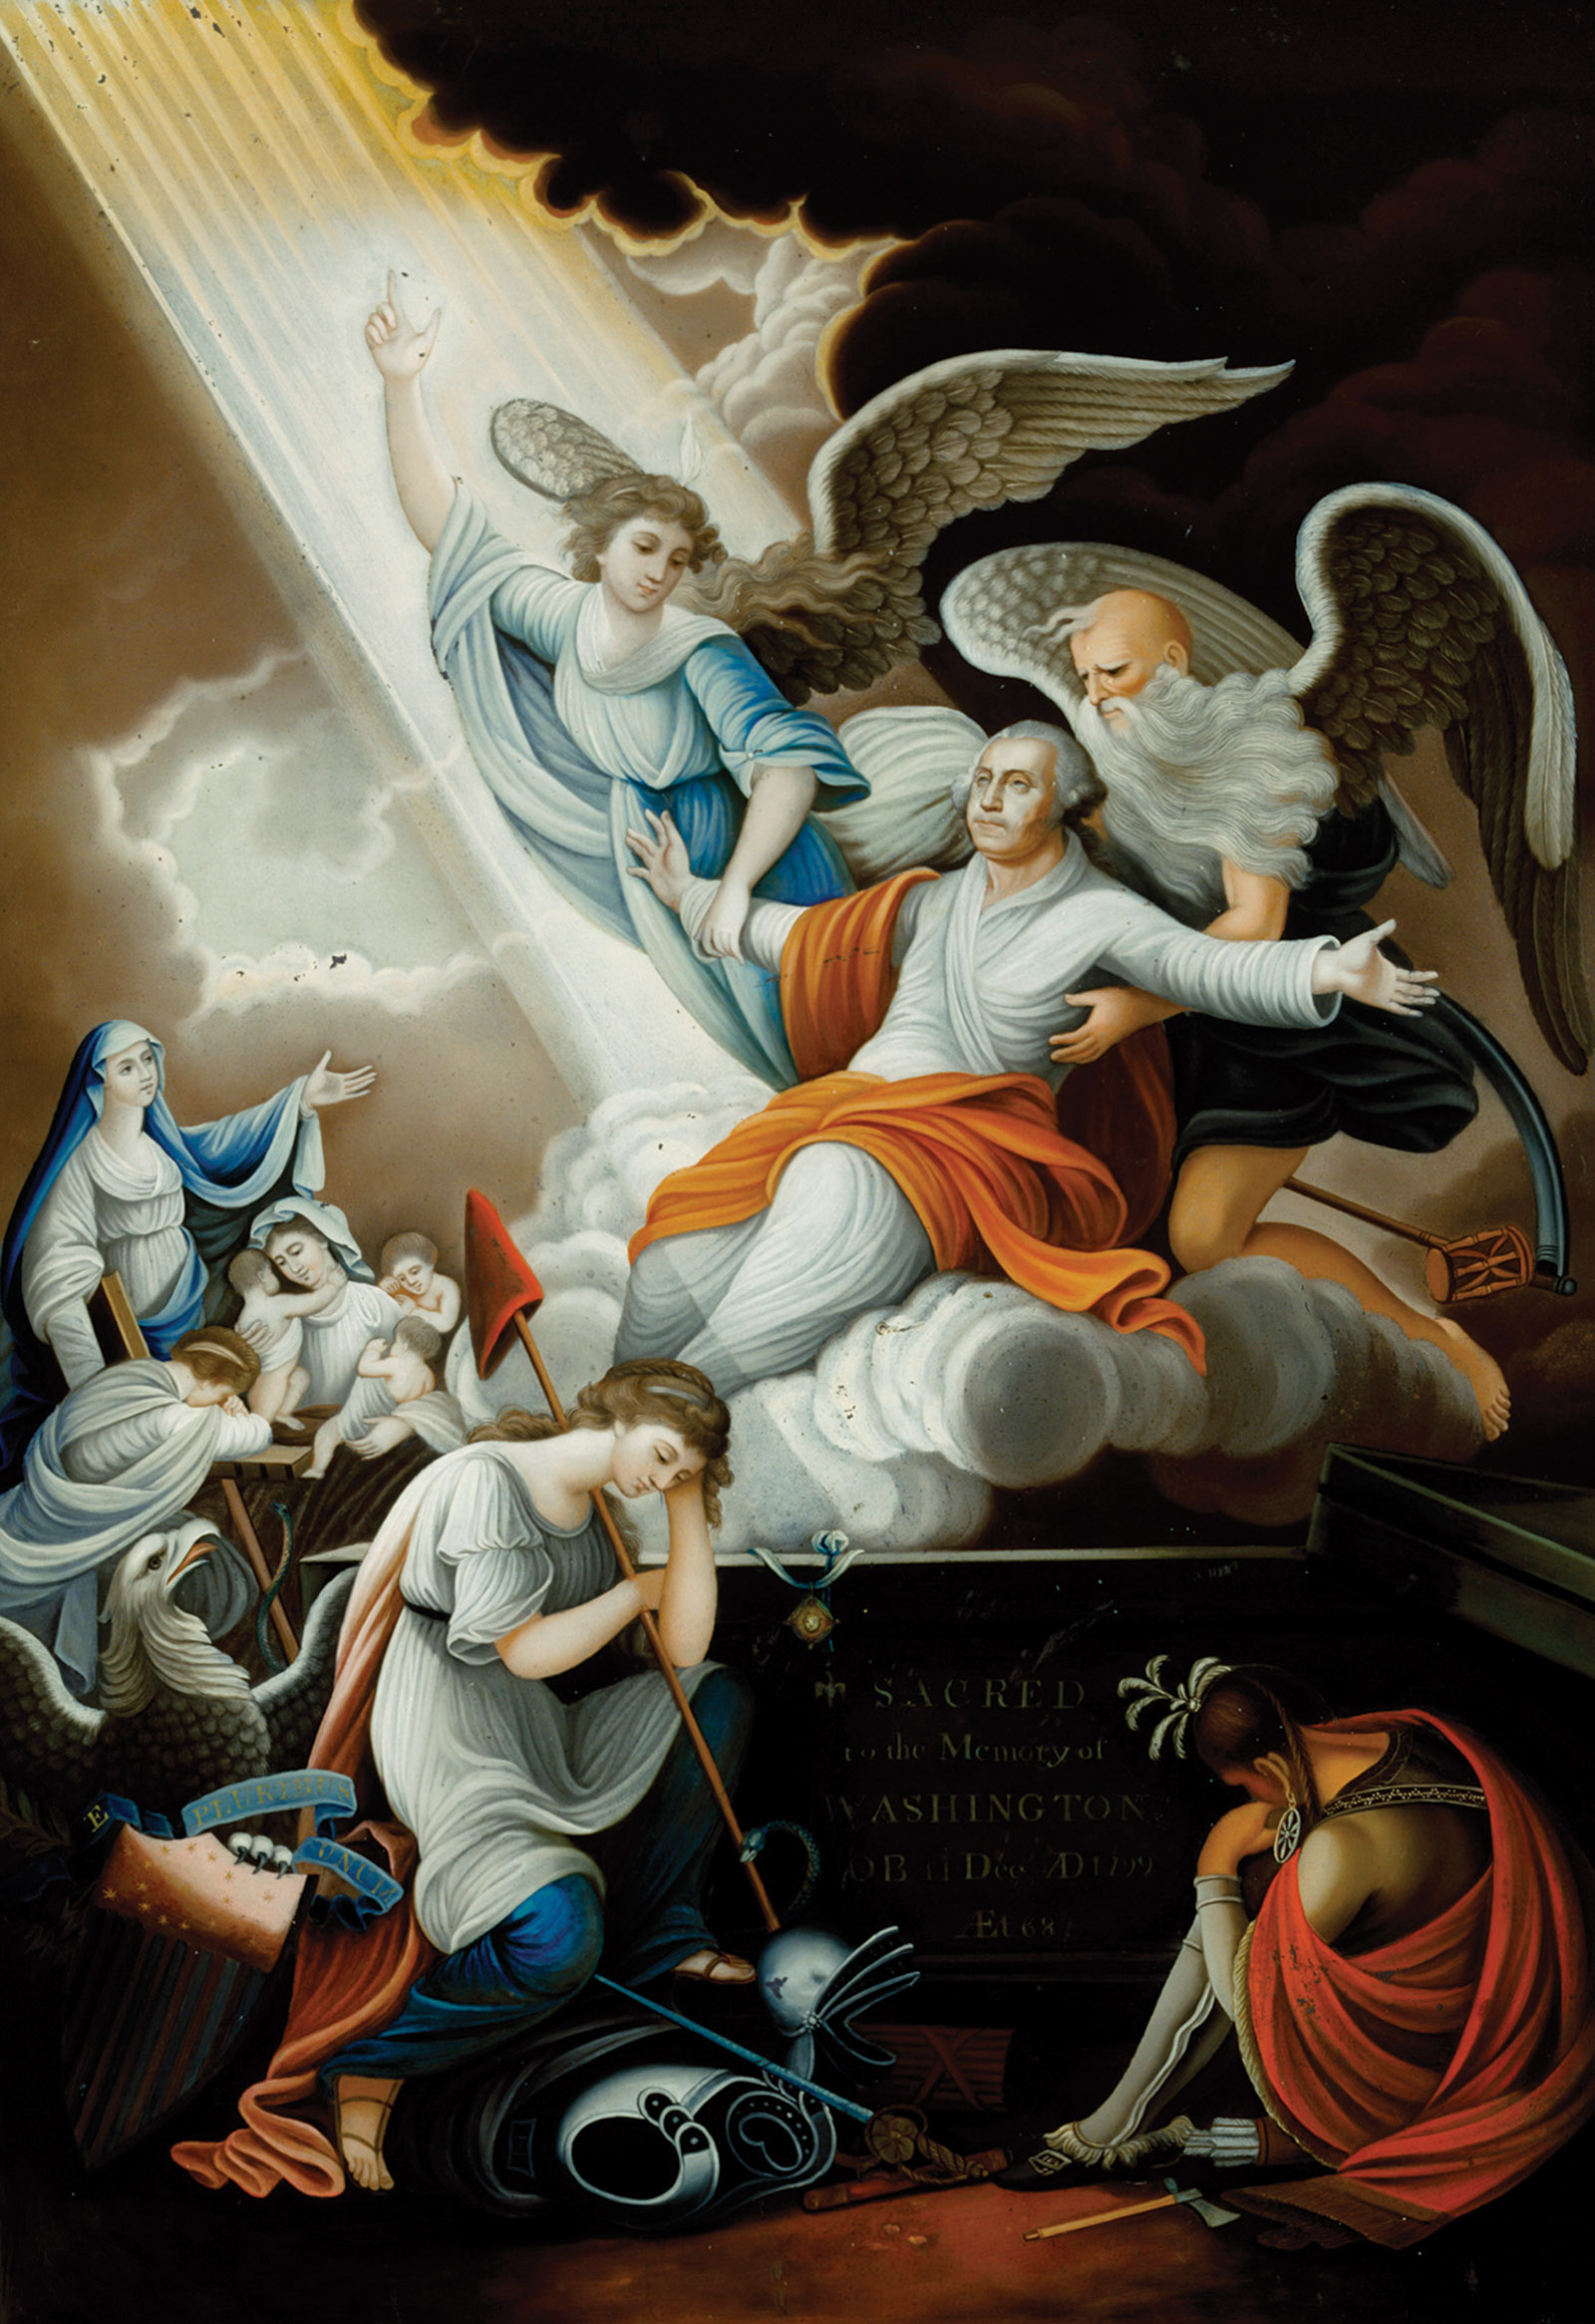 John James Barralet: Apotheosis of Washington, showing Lady Liberty and an Indian figure mourning as George Washington ascends to heaven, circa 1802